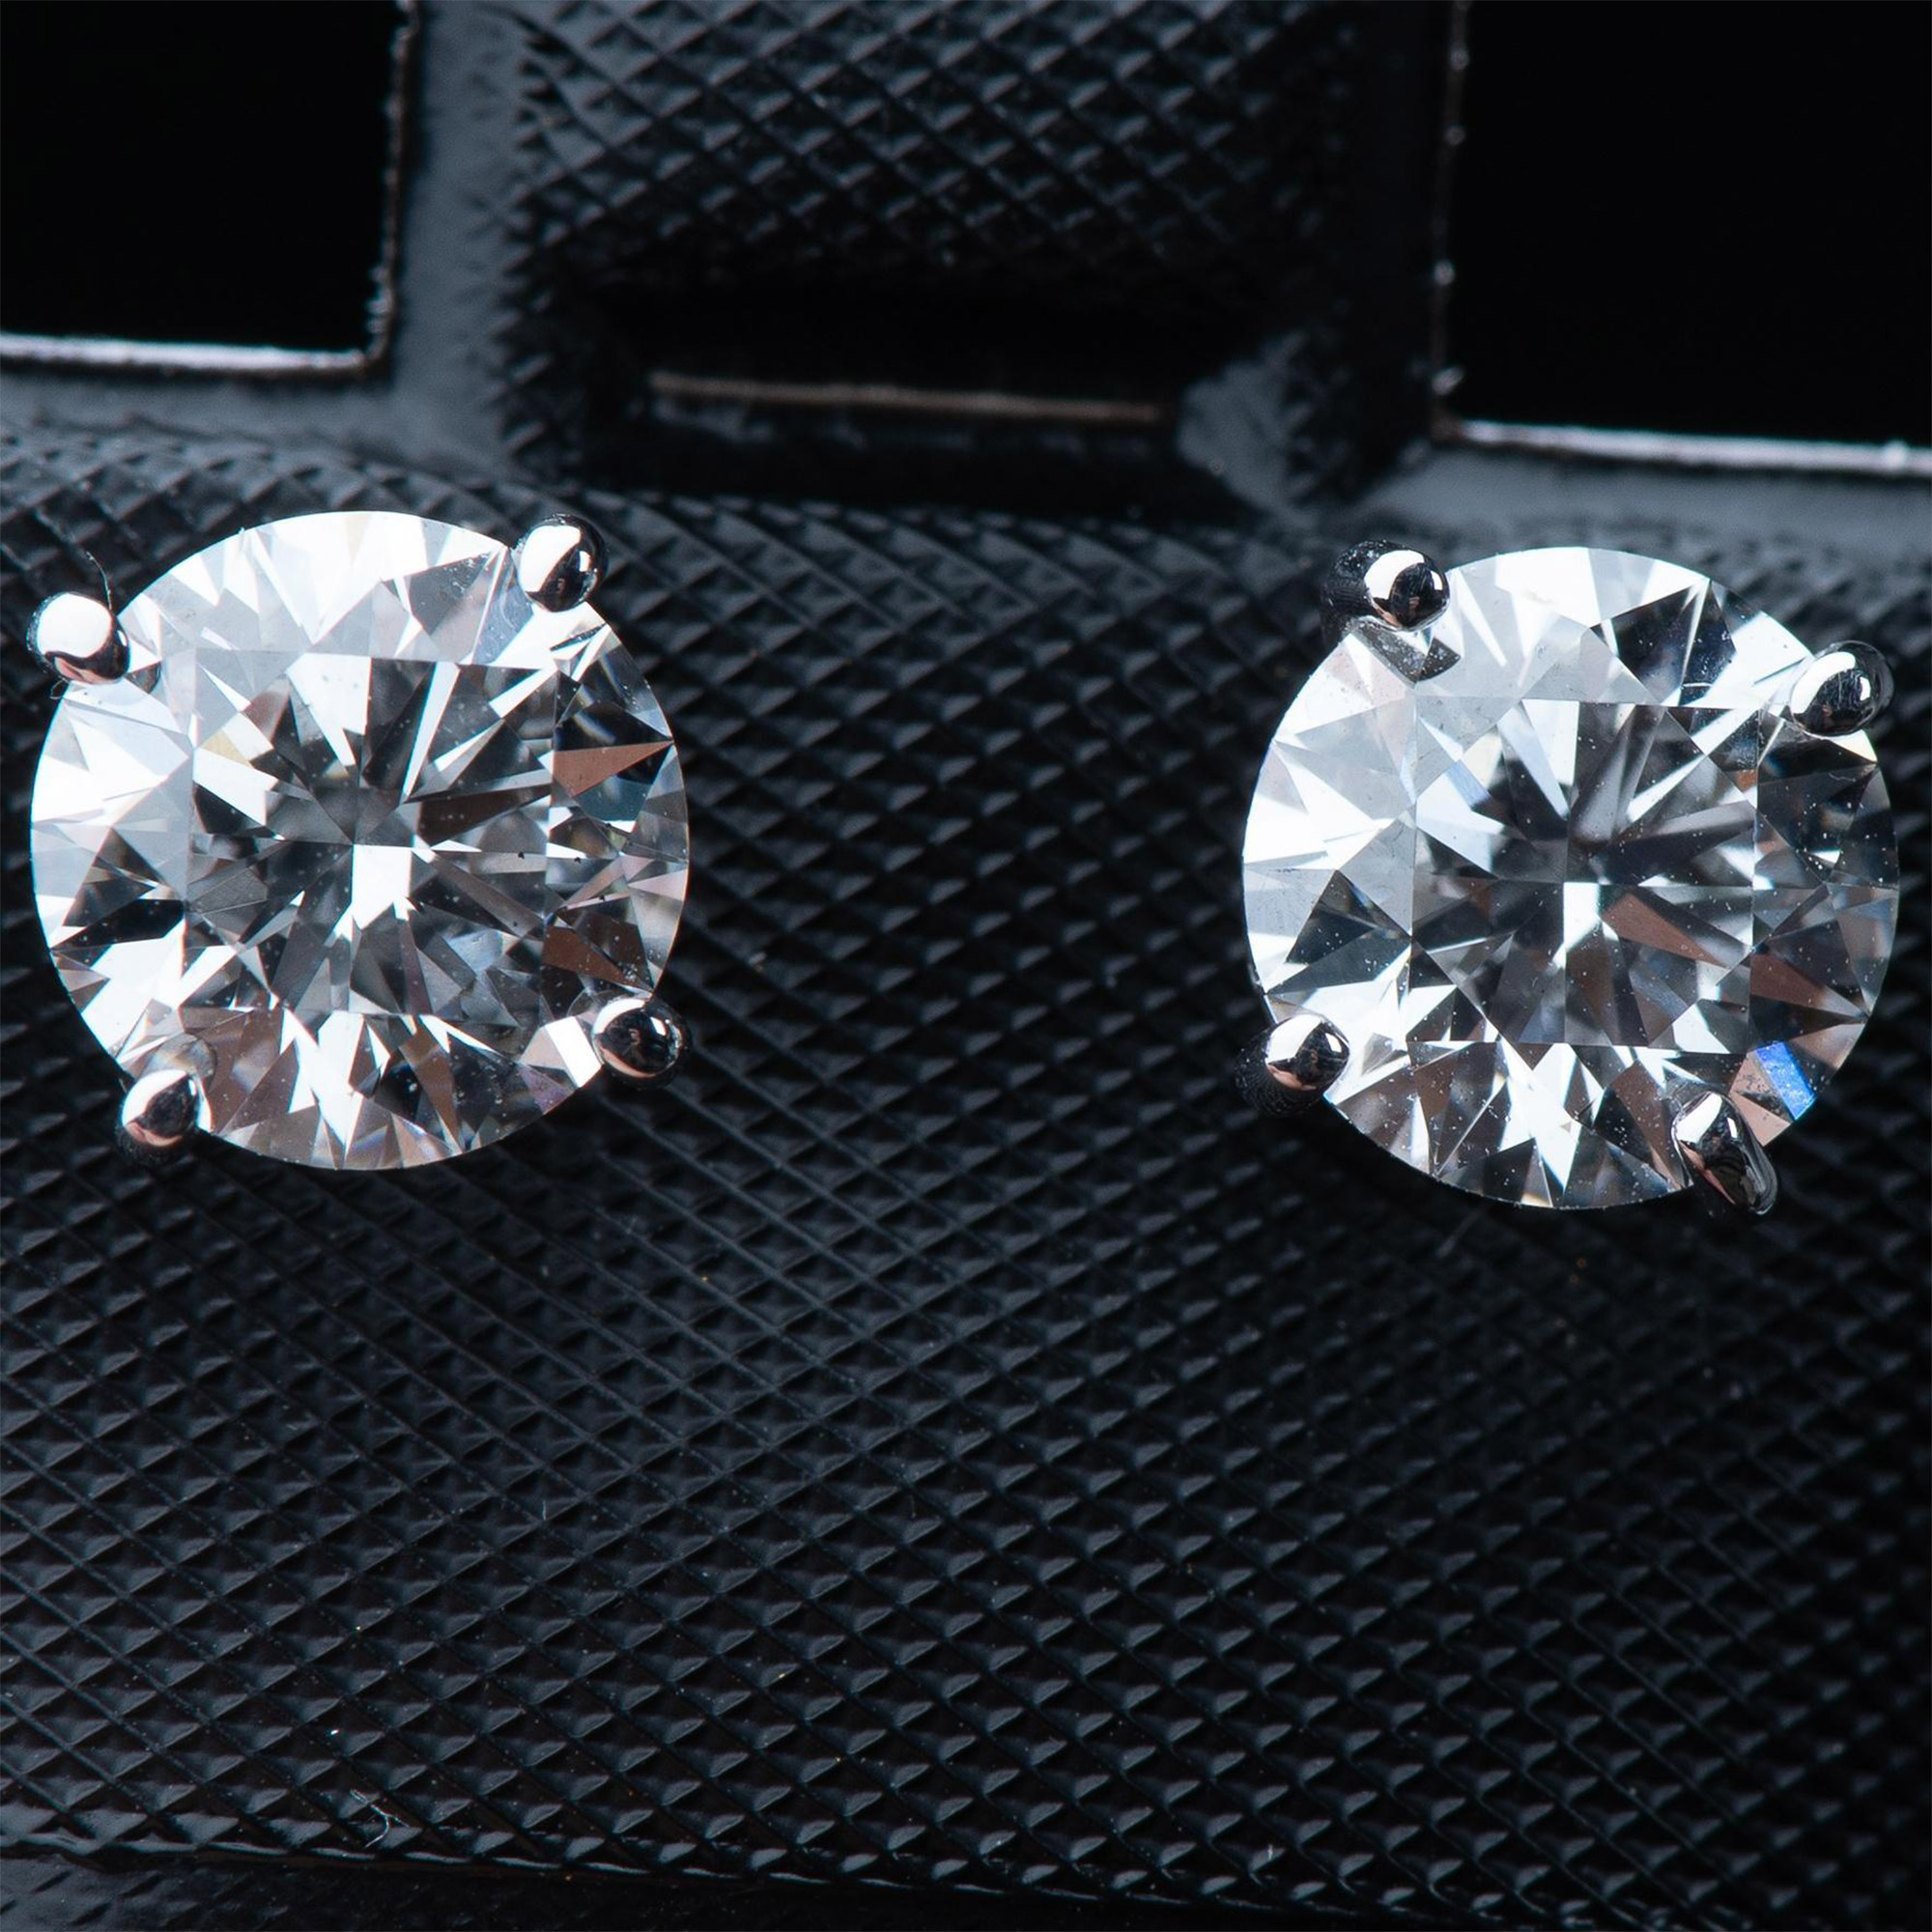 Stunning 14K White Gold and Lab Diamond Earrings - Image 6 of 6